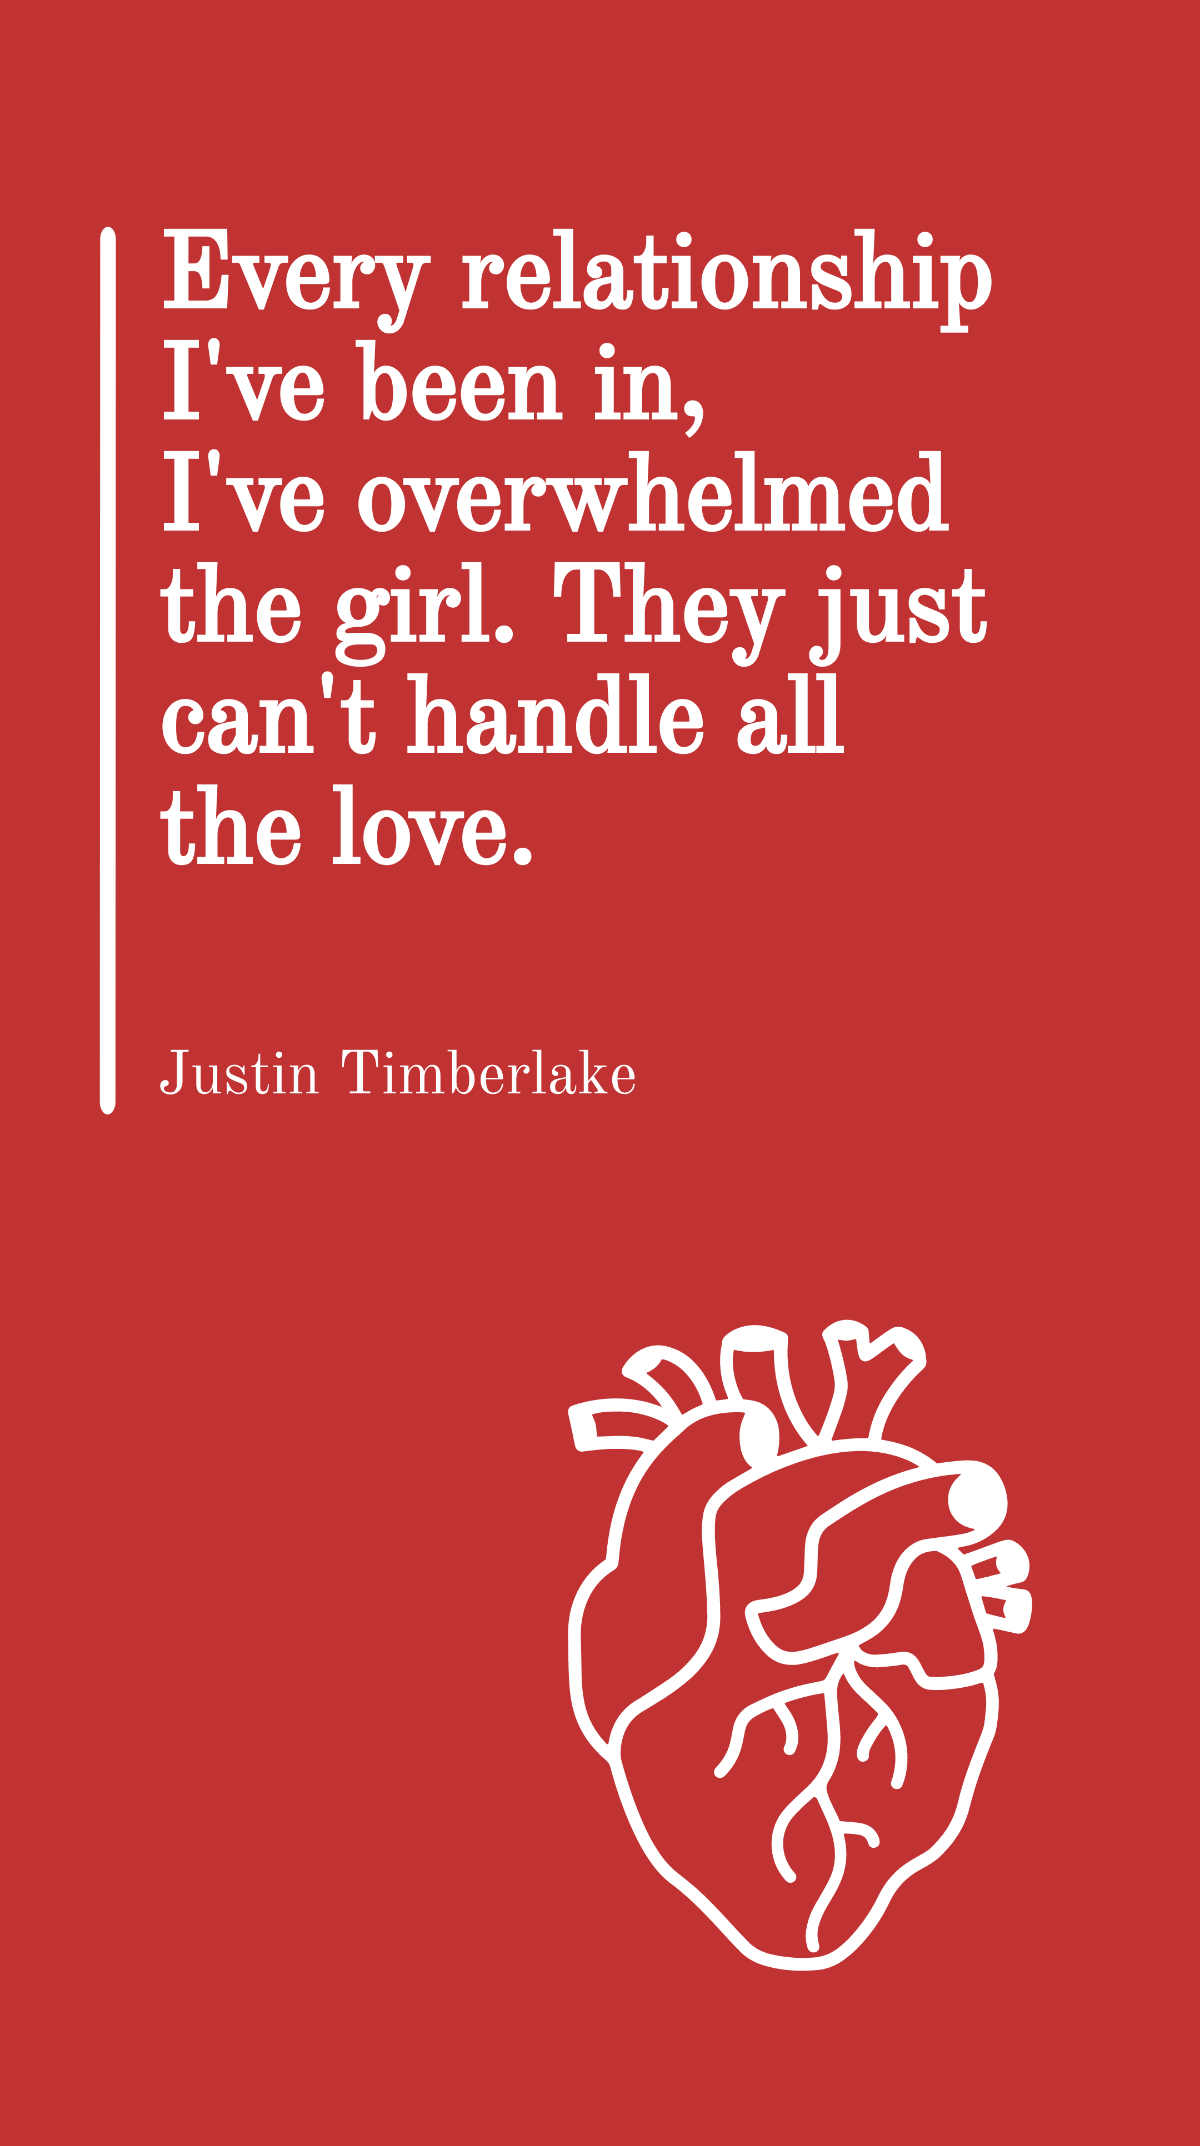 Justin Timberlake - Every relationship I've been in, I've overwhelmed the girl. They just can't handle all the love. Template